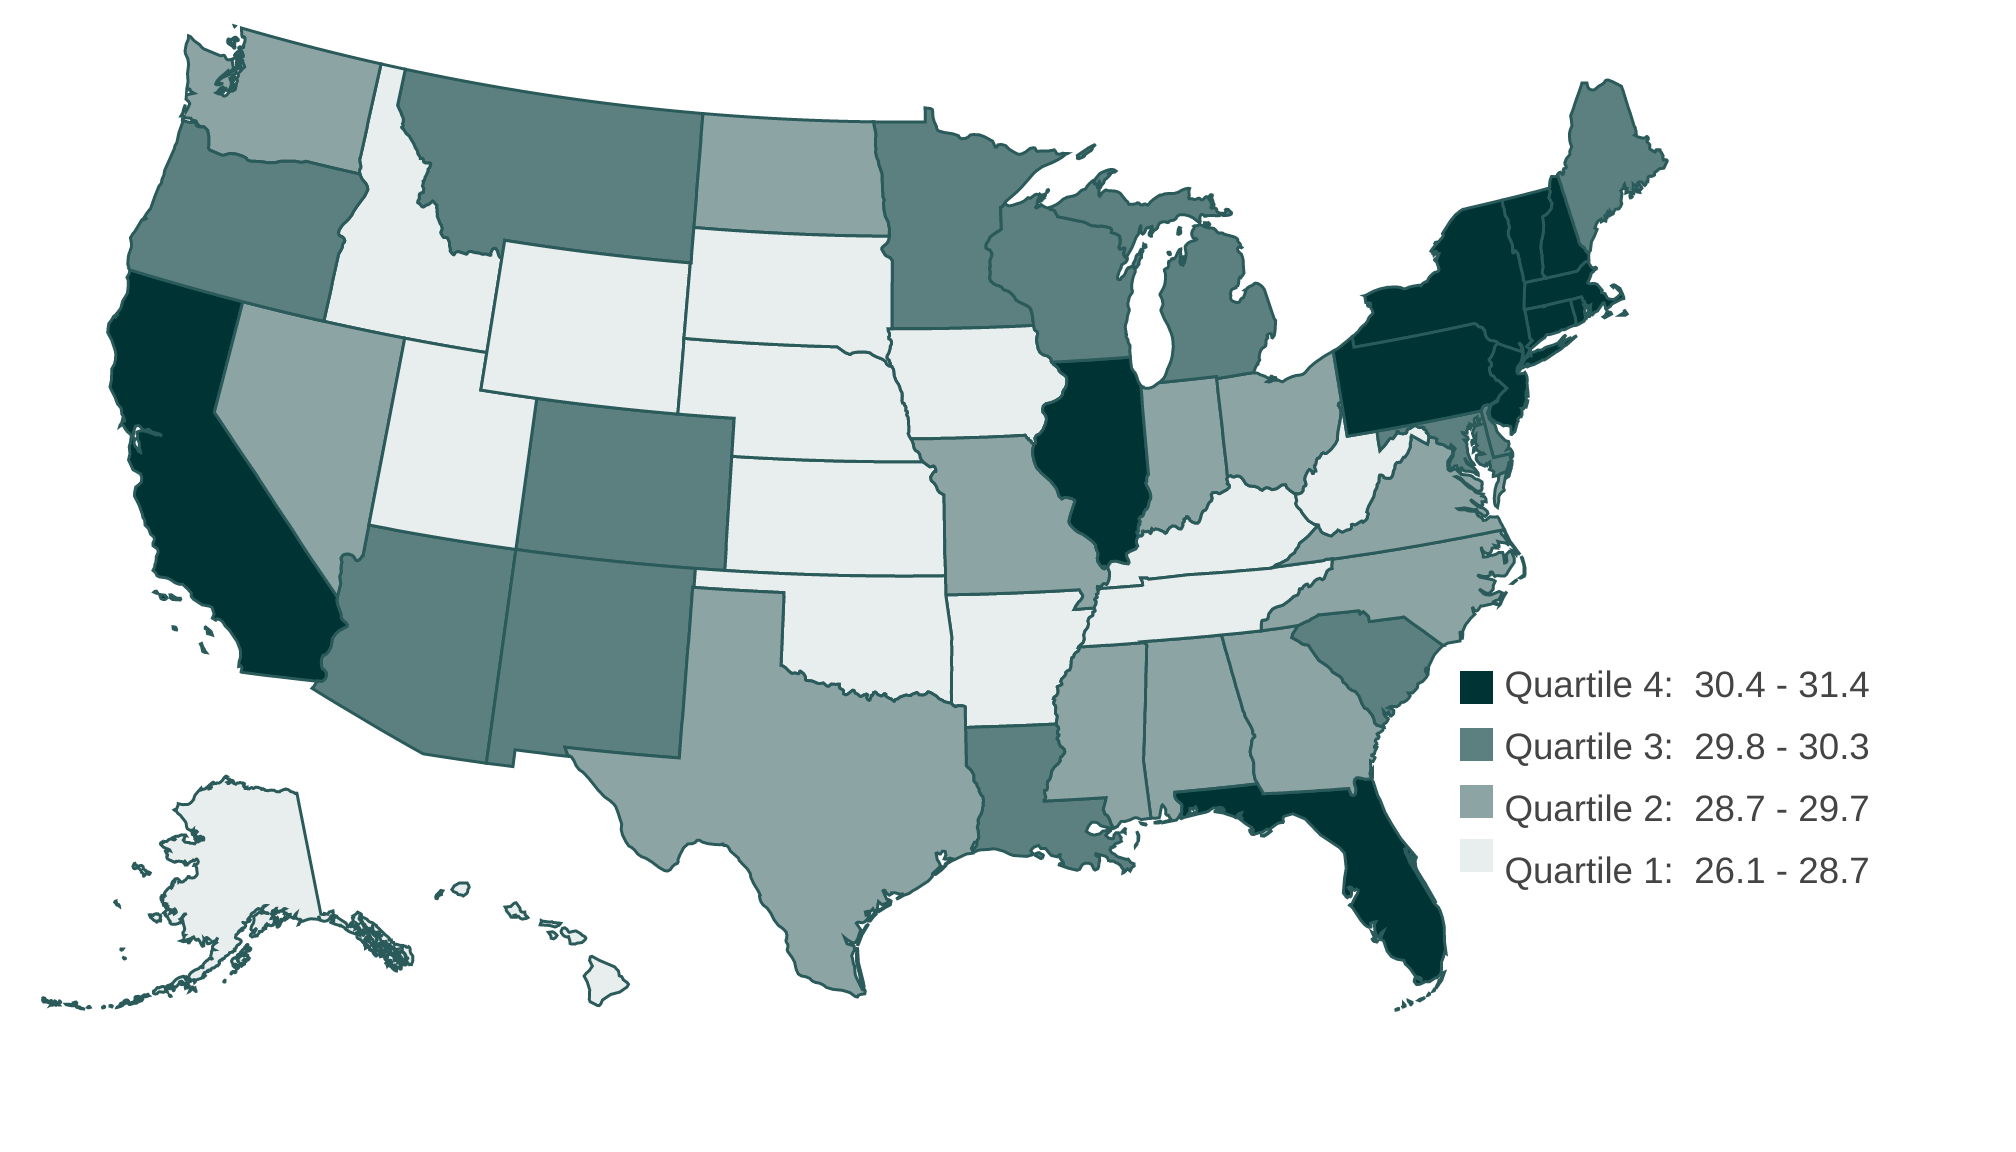 US map in shades of teal showing men's state-level median age at 1st marriage by quartile, 2017